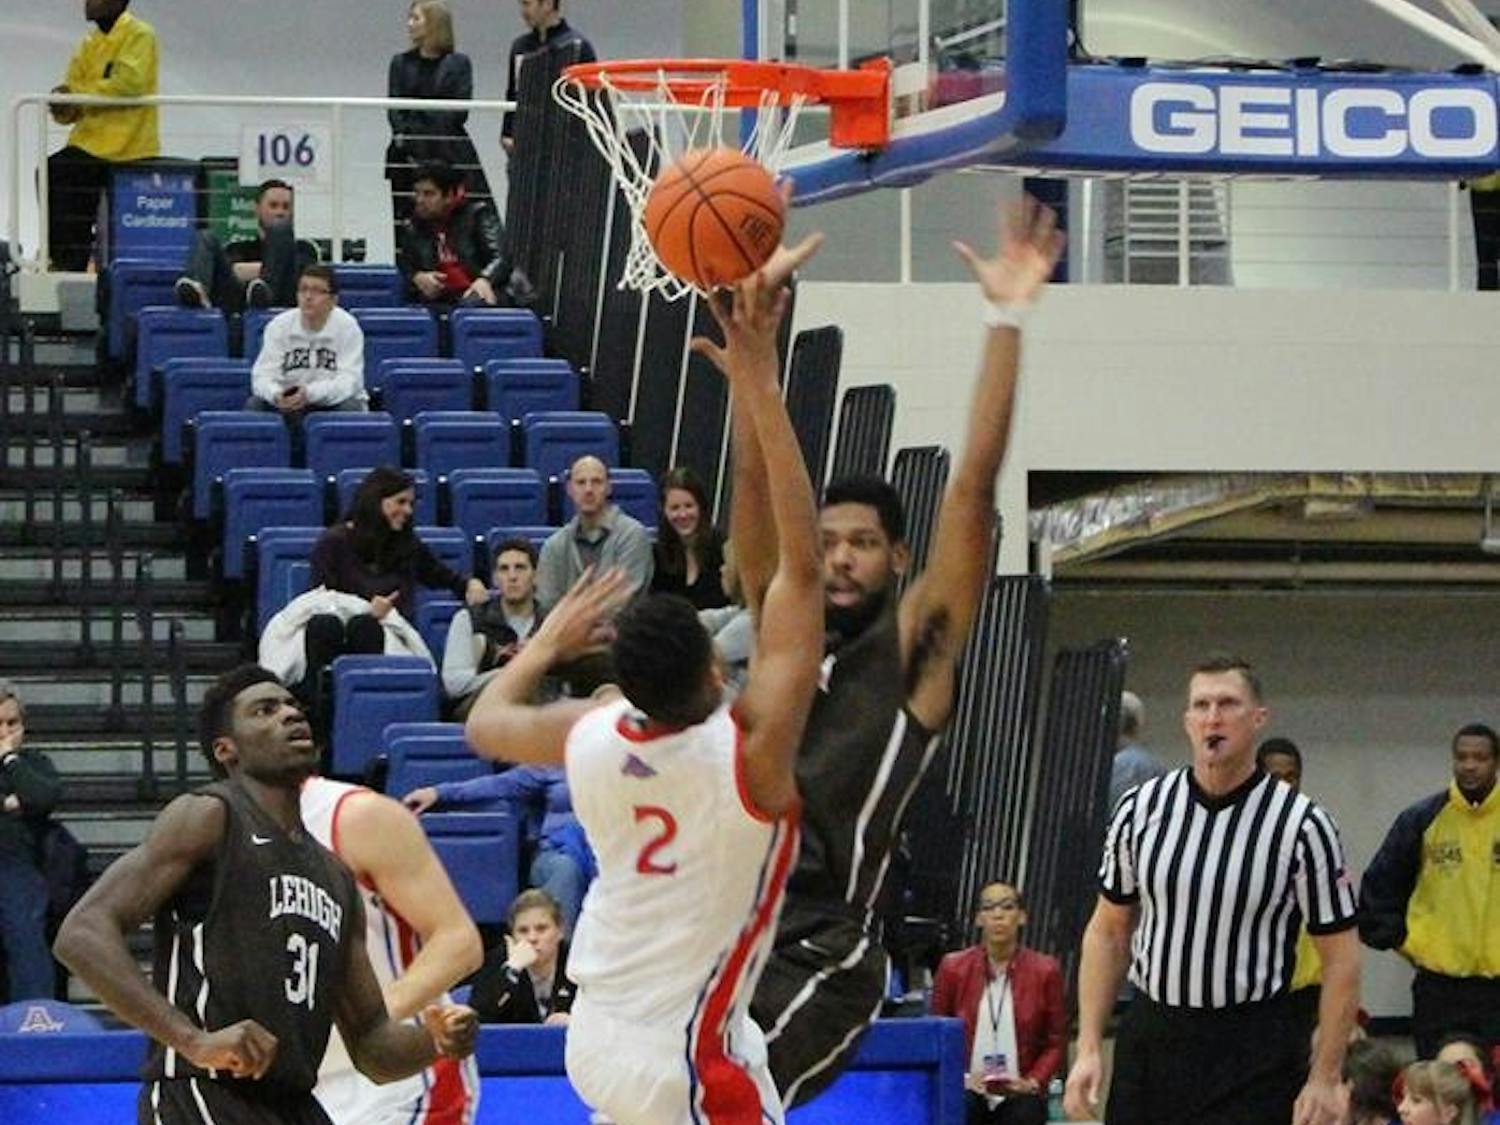 Sophomore guard Delante Jones goes up for a layup against Lehigh in home game last season on Jan. 9, 2016.